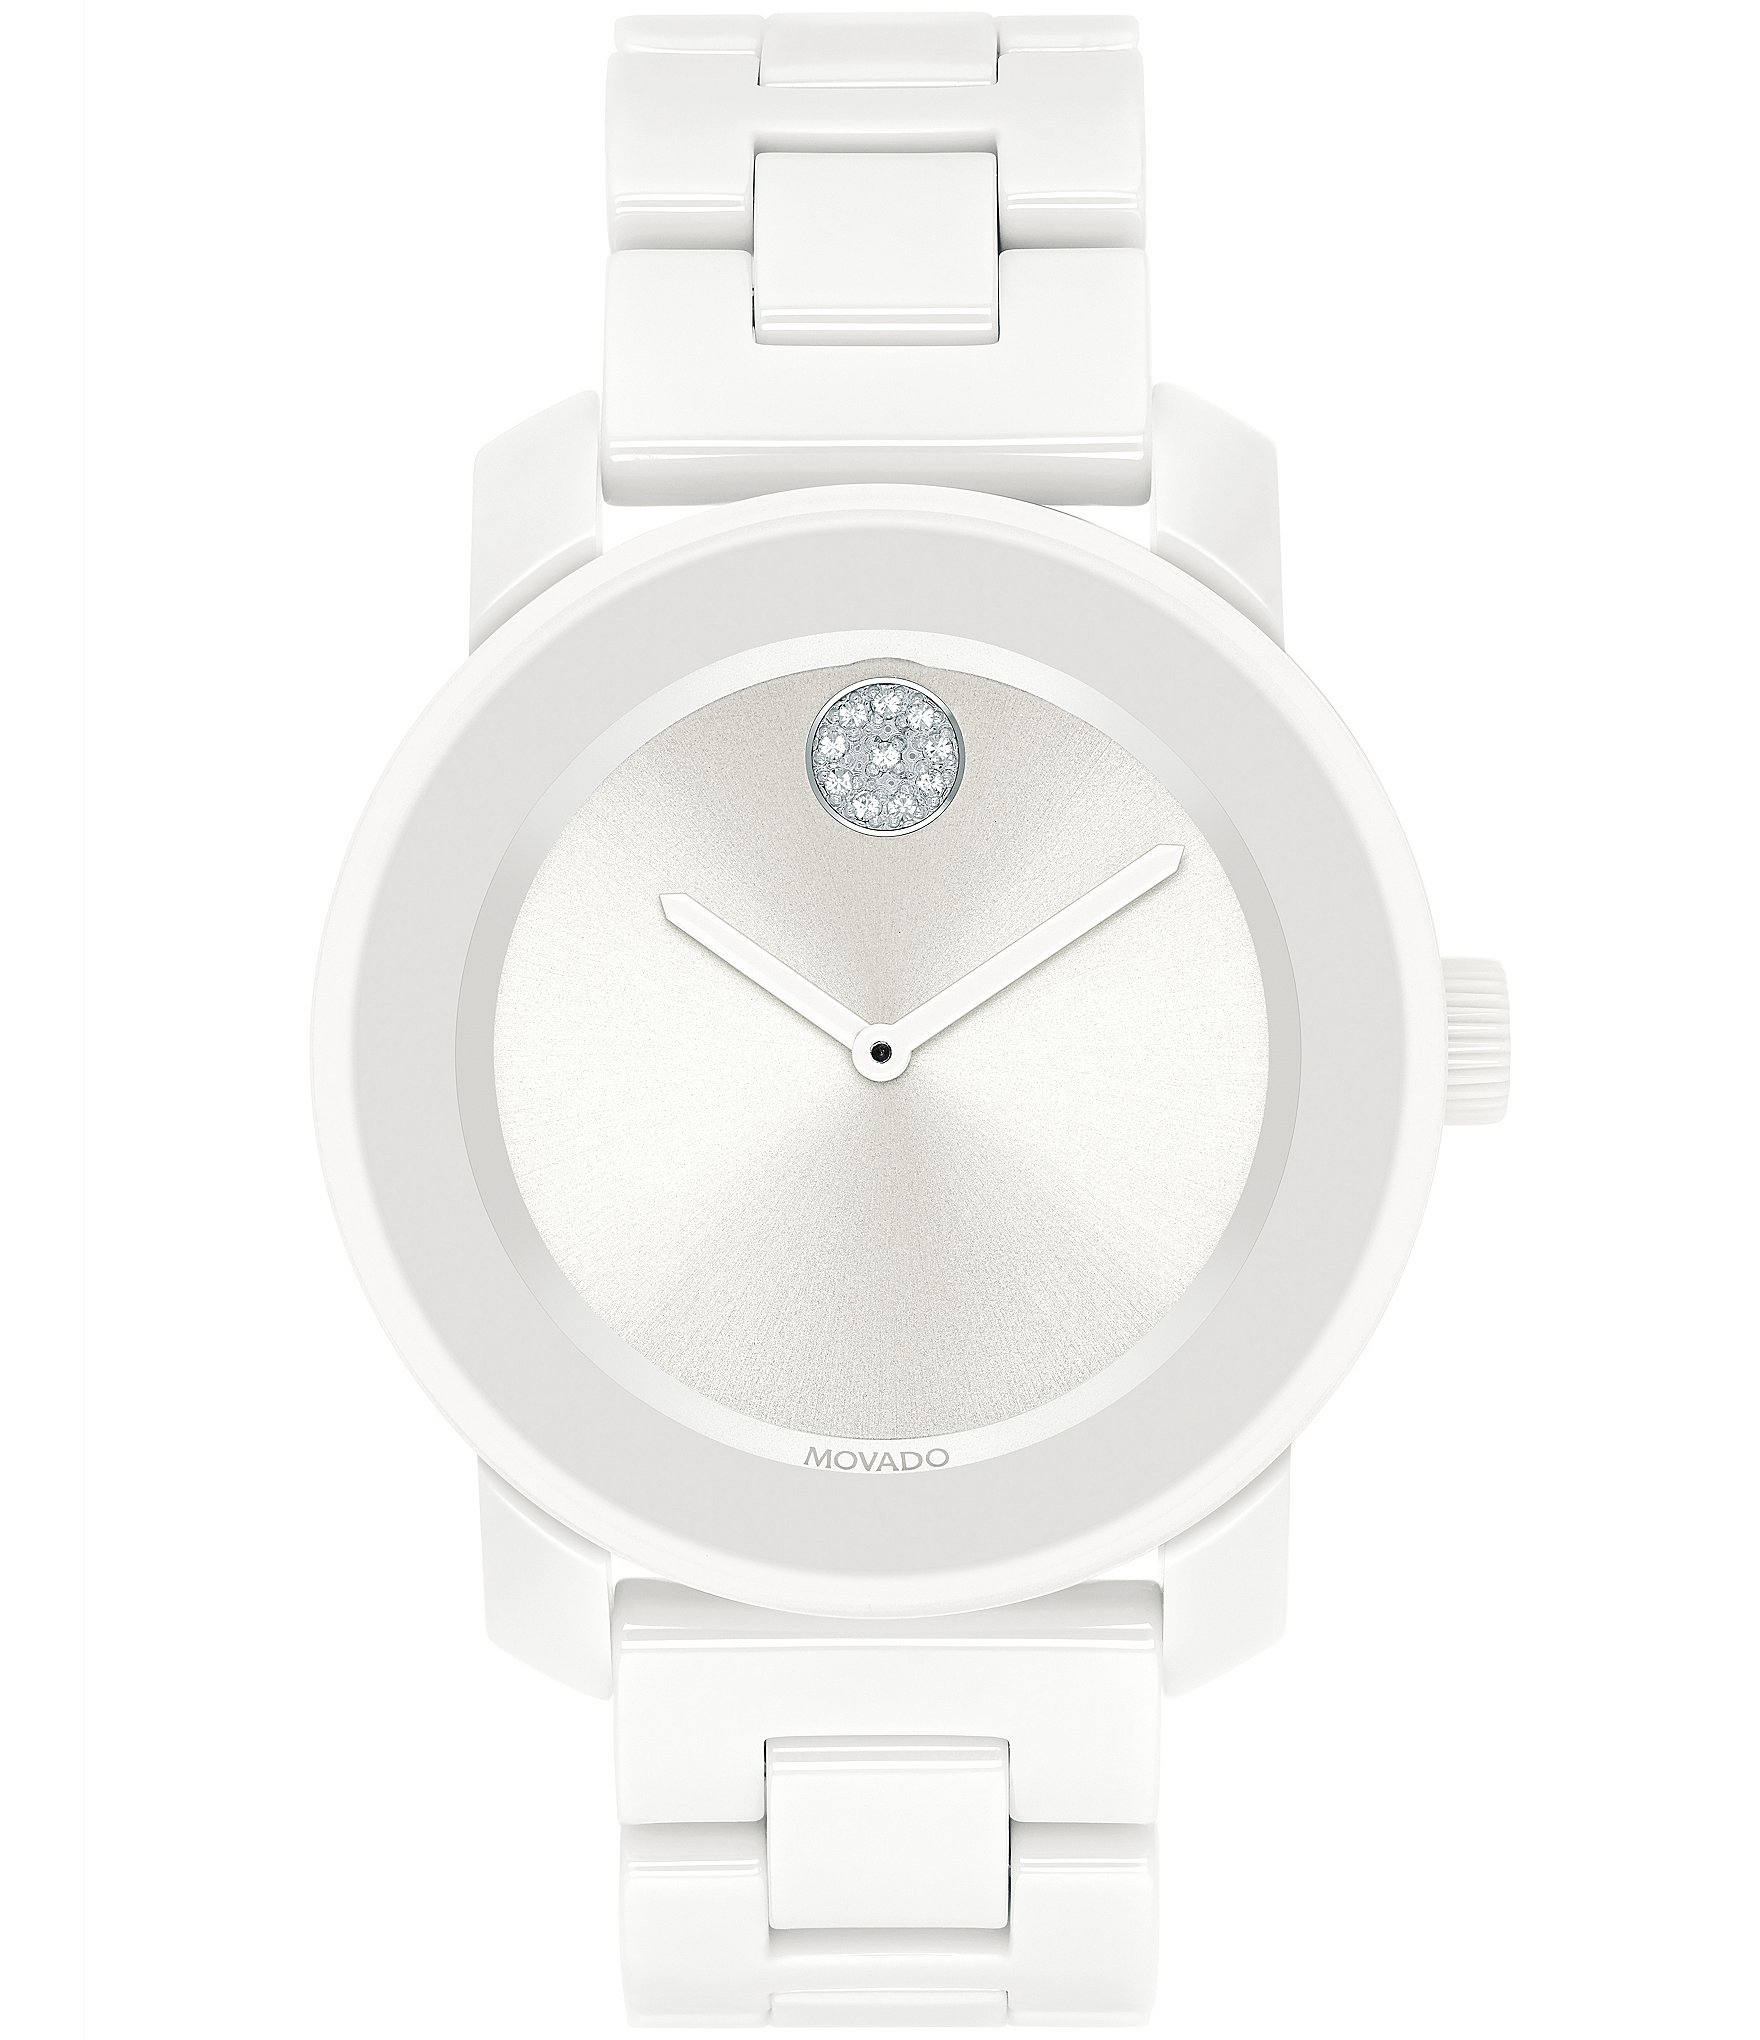 White Movado Watch Men's | peacecommission.kdsg.gov.ng